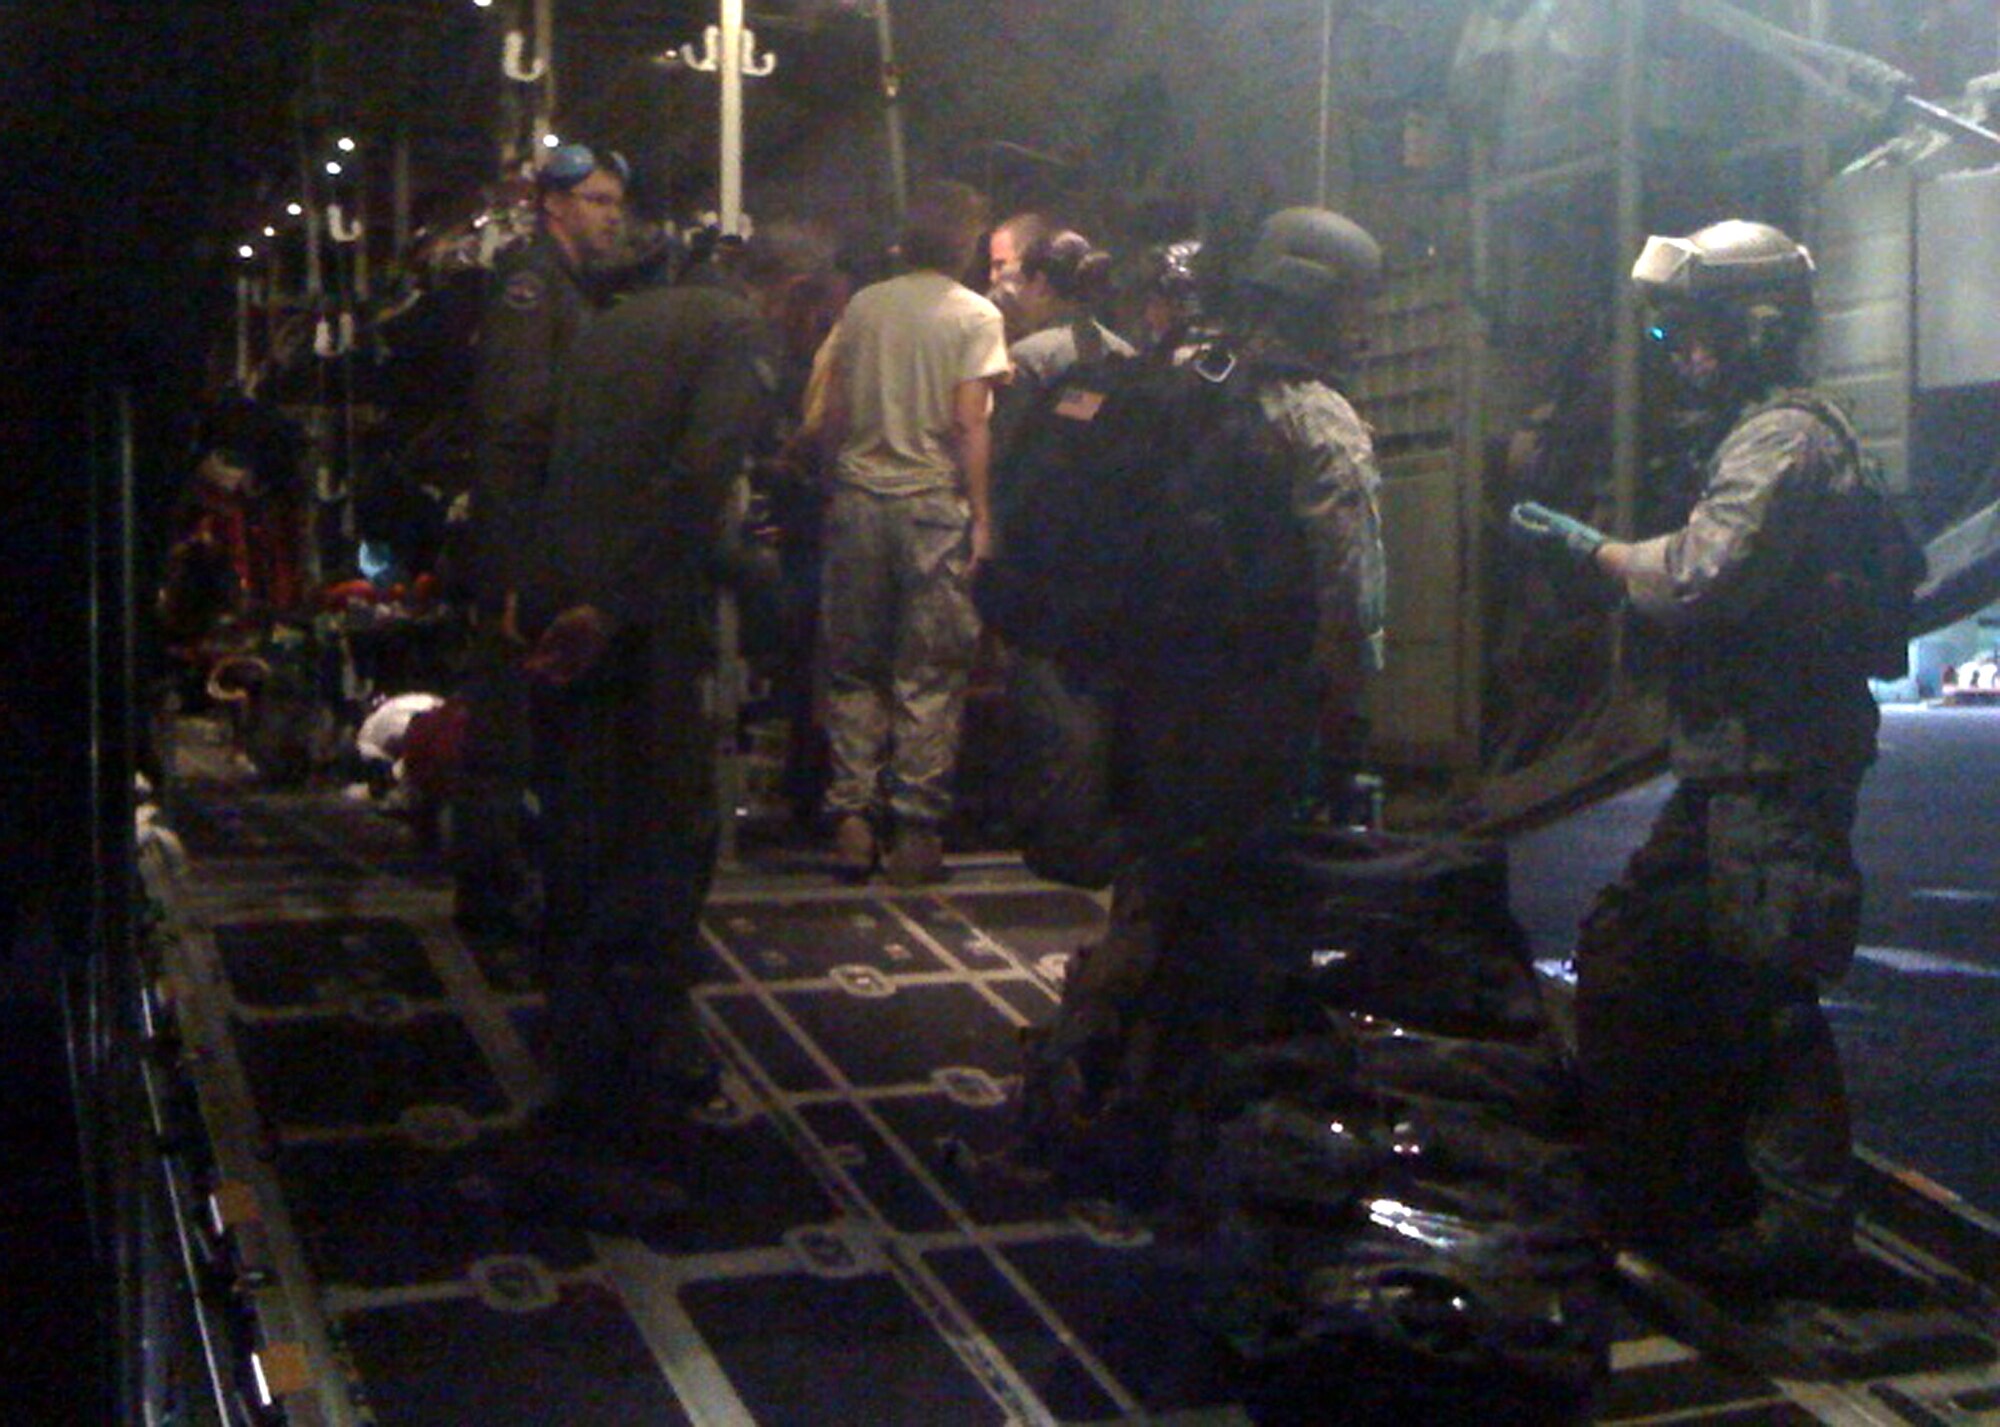 Military medics and C-130 Hercules aircrew members from the Air Force Reserve's 302nd Airlift Wing finalize plans to transport evacuees during the early morning hours of Jan. 17 at Toussaint Louverture International Airport in Port-au-Prince, Haiti. The C-130 aircrew, based at Peterson Air Force Base, Colo., transported the injured Haitians to Fort Lauderdale, Fla., where they received additional medical treatment. (U.S. Air Force photo/Capt. Brian McReynolds)